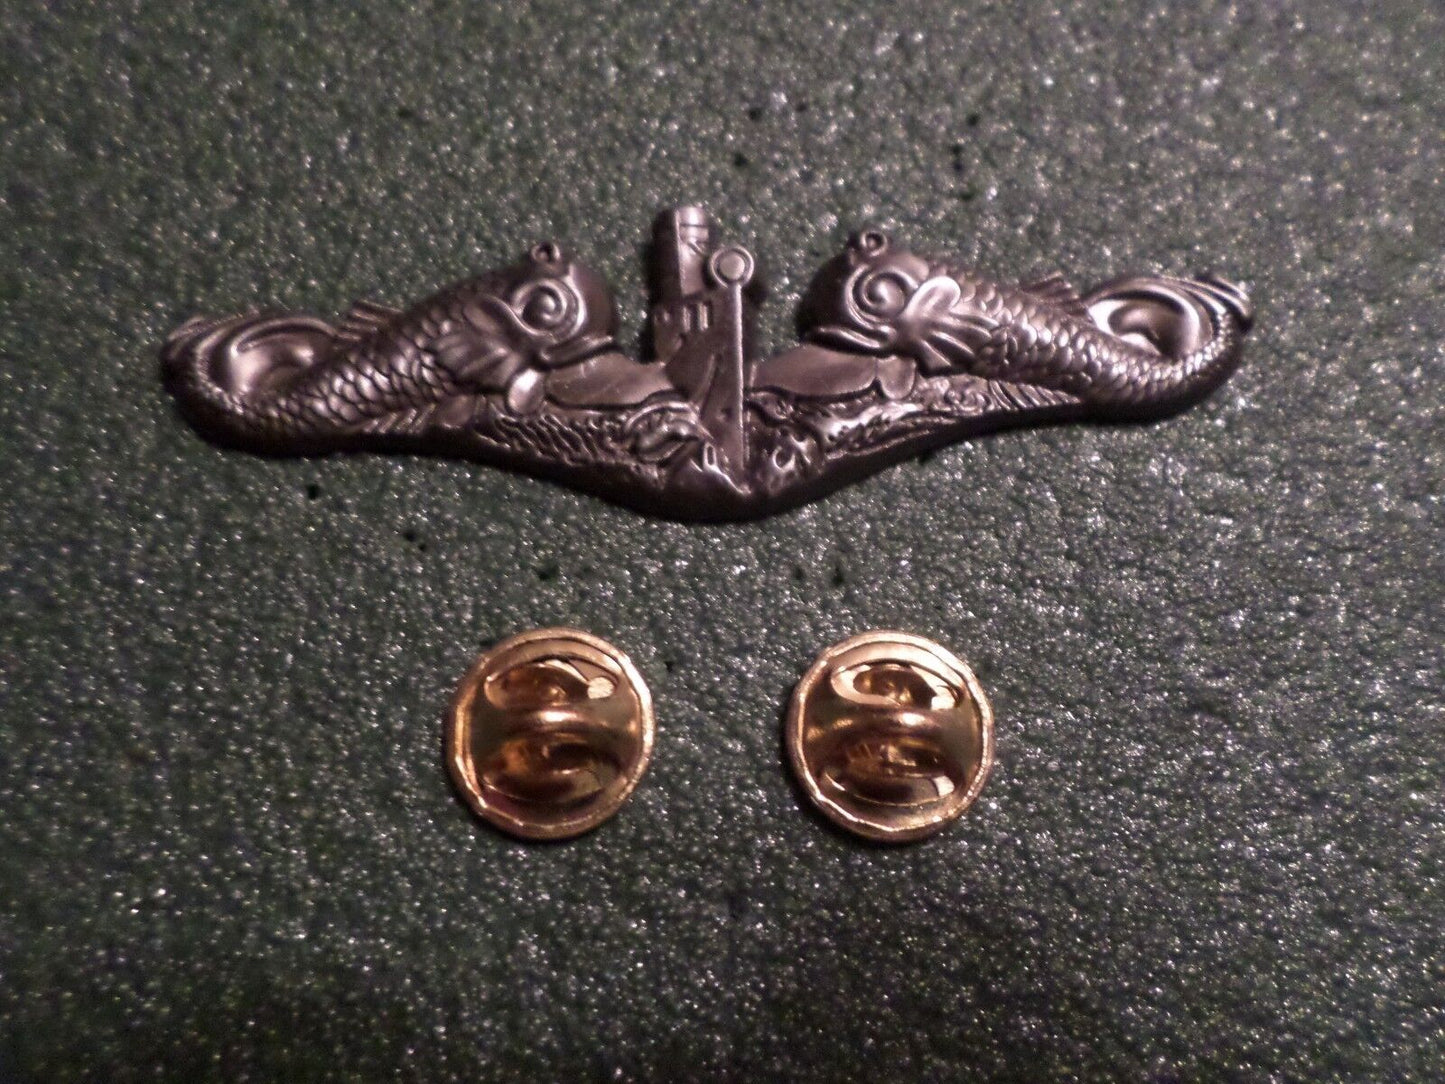 U.S MILITARY NAVY SILVER ENLISTED SUBMARINE PIN BADGE DOUBLE CLUTCH BACK